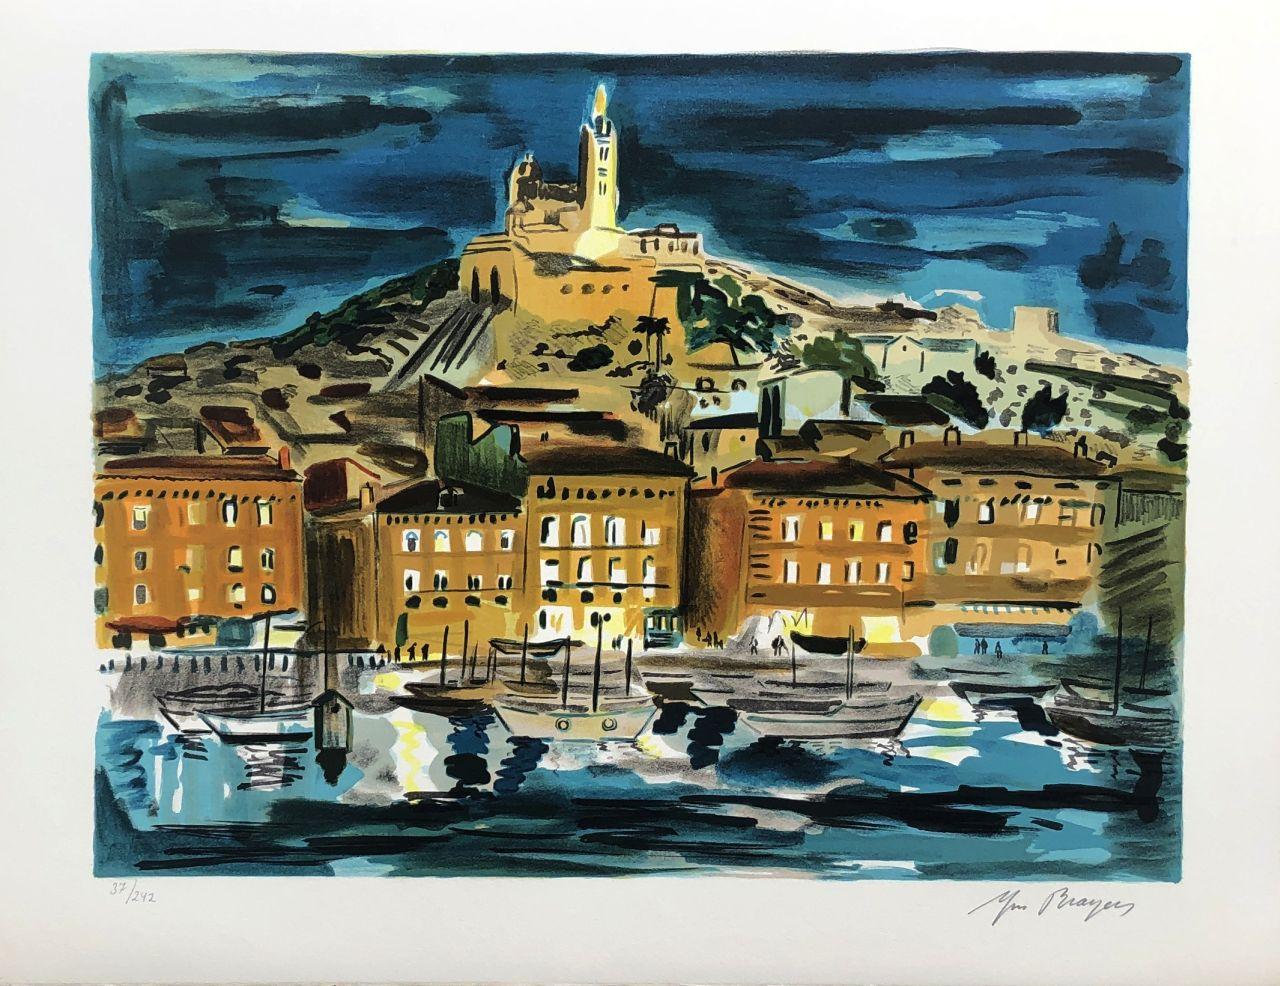 Yves Brayer Landscape Print - France : Marseille by Night - Original Lithograph Handsigned Numbered